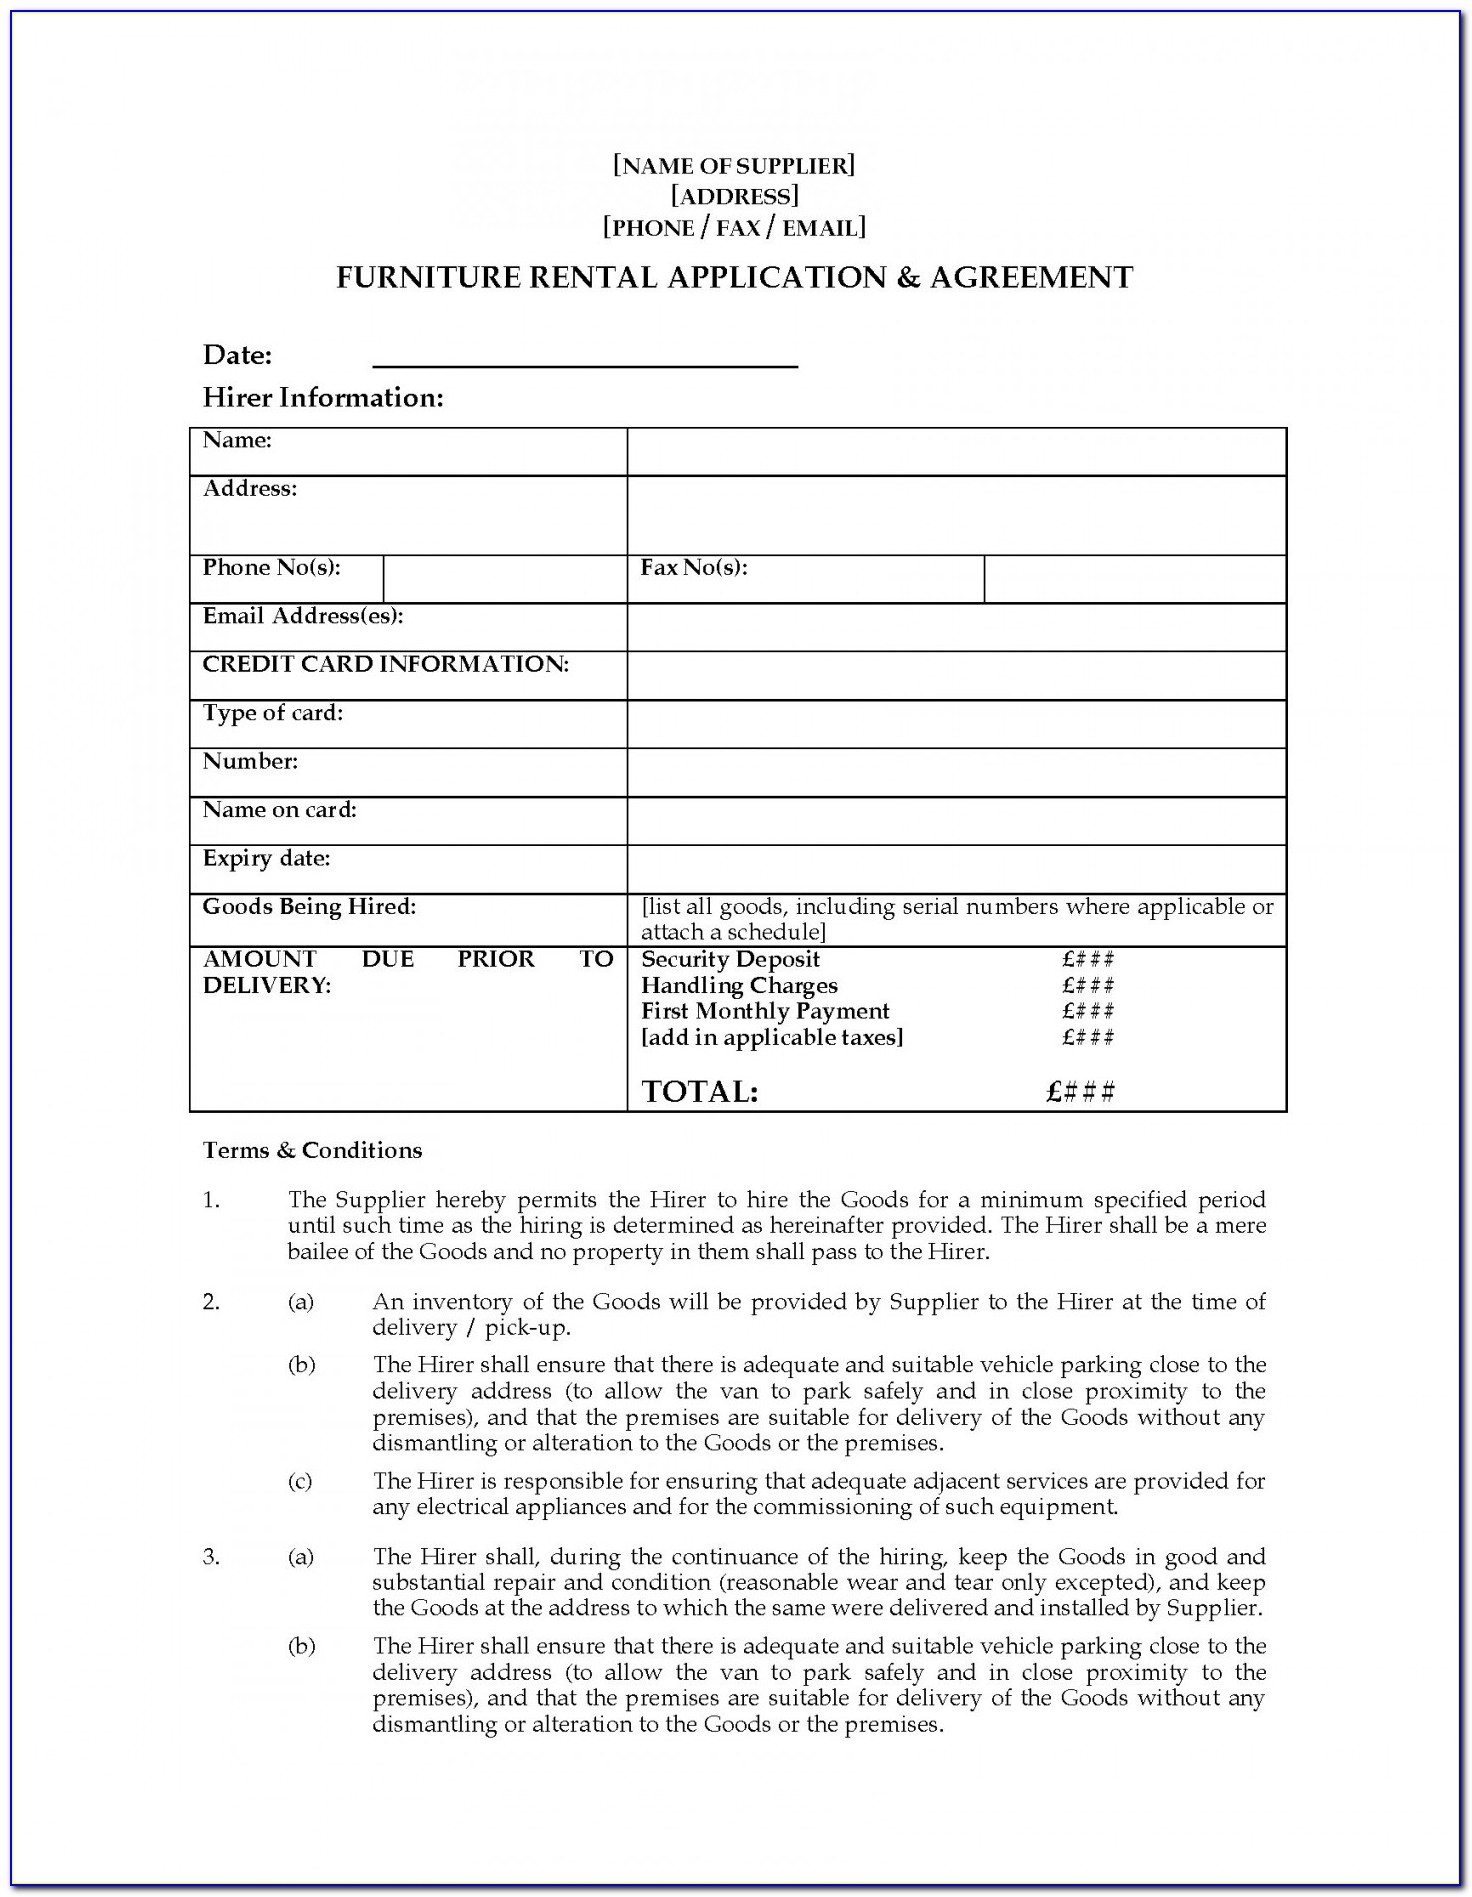 Furniture Lease Agreement Template Pic 49 Good Furniture Rental Agreement Template Word Pe D67958